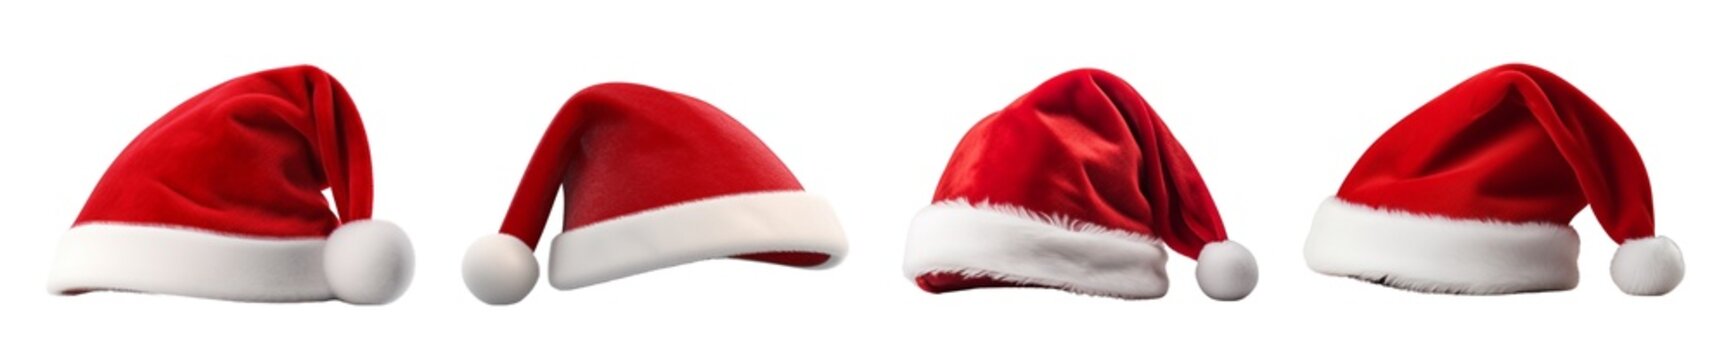 A Collection of Santa Hats on Transparent Background